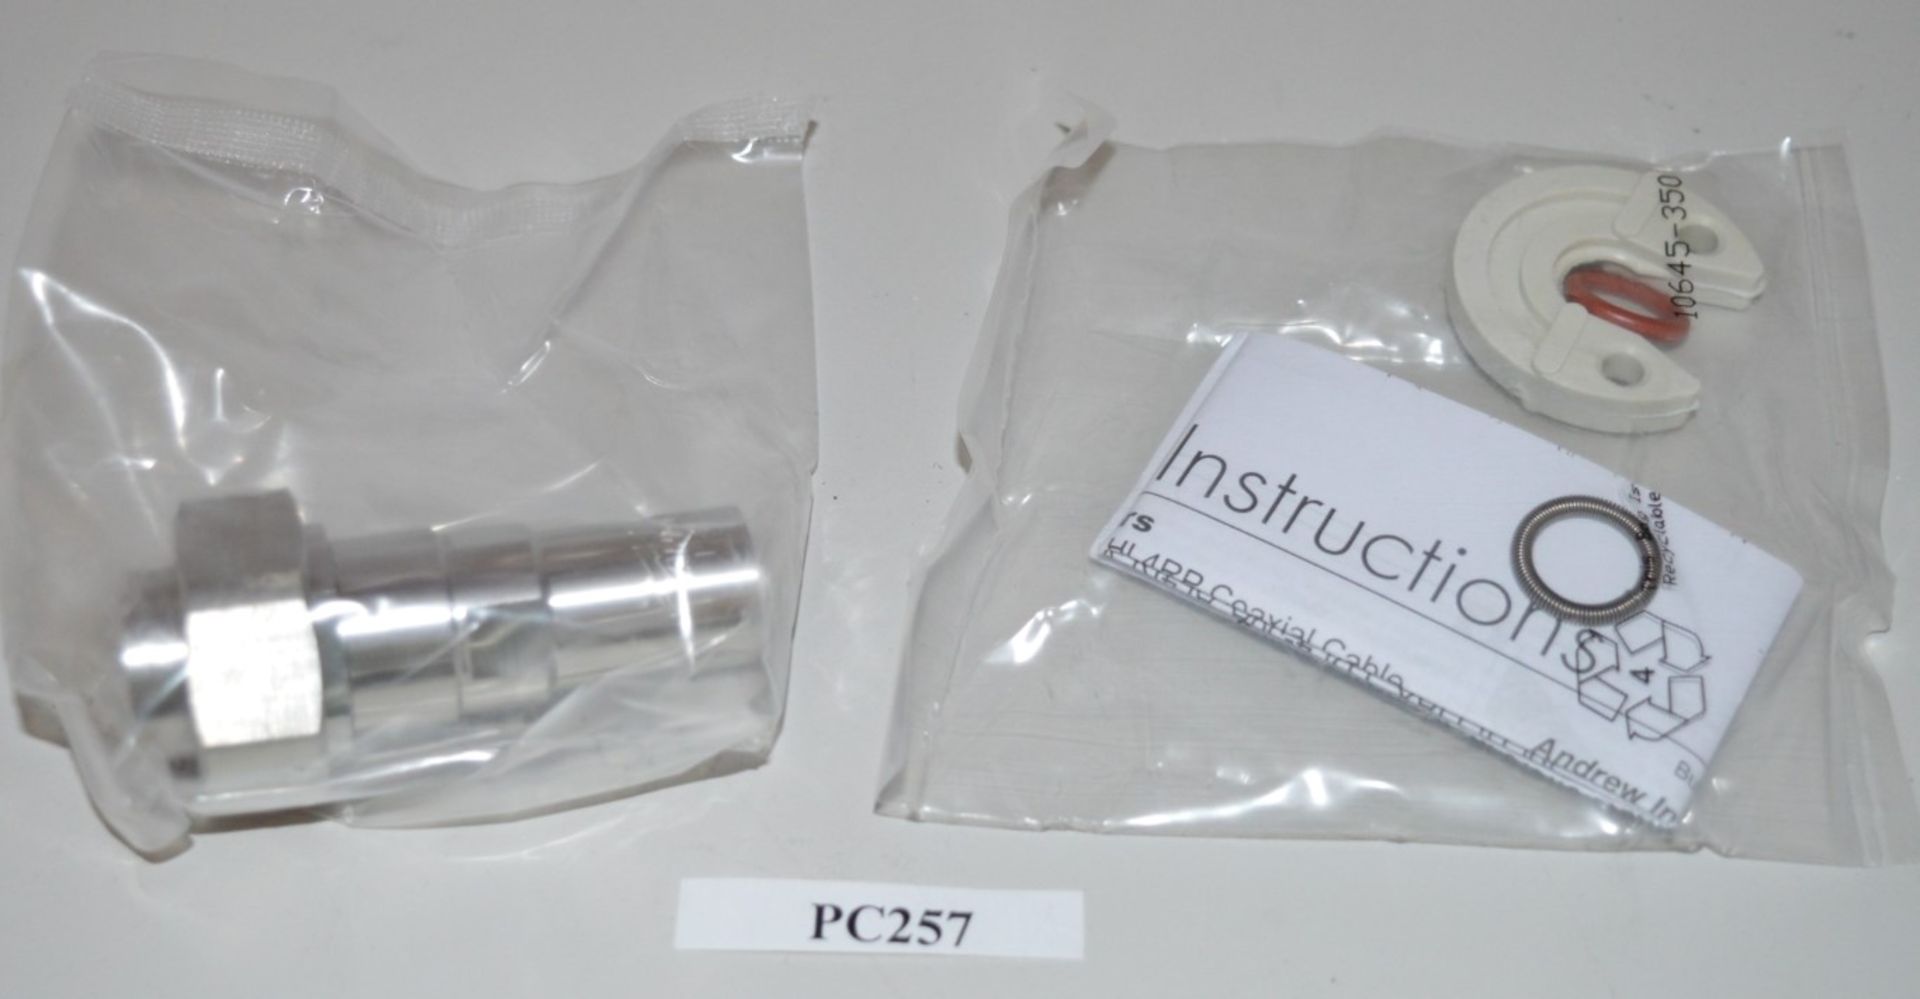 18 x Commscope L4TDM-PSA Din Male Positive Stop Connectors - Andrew Solutions - Brand New Boxed - Image 8 of 8